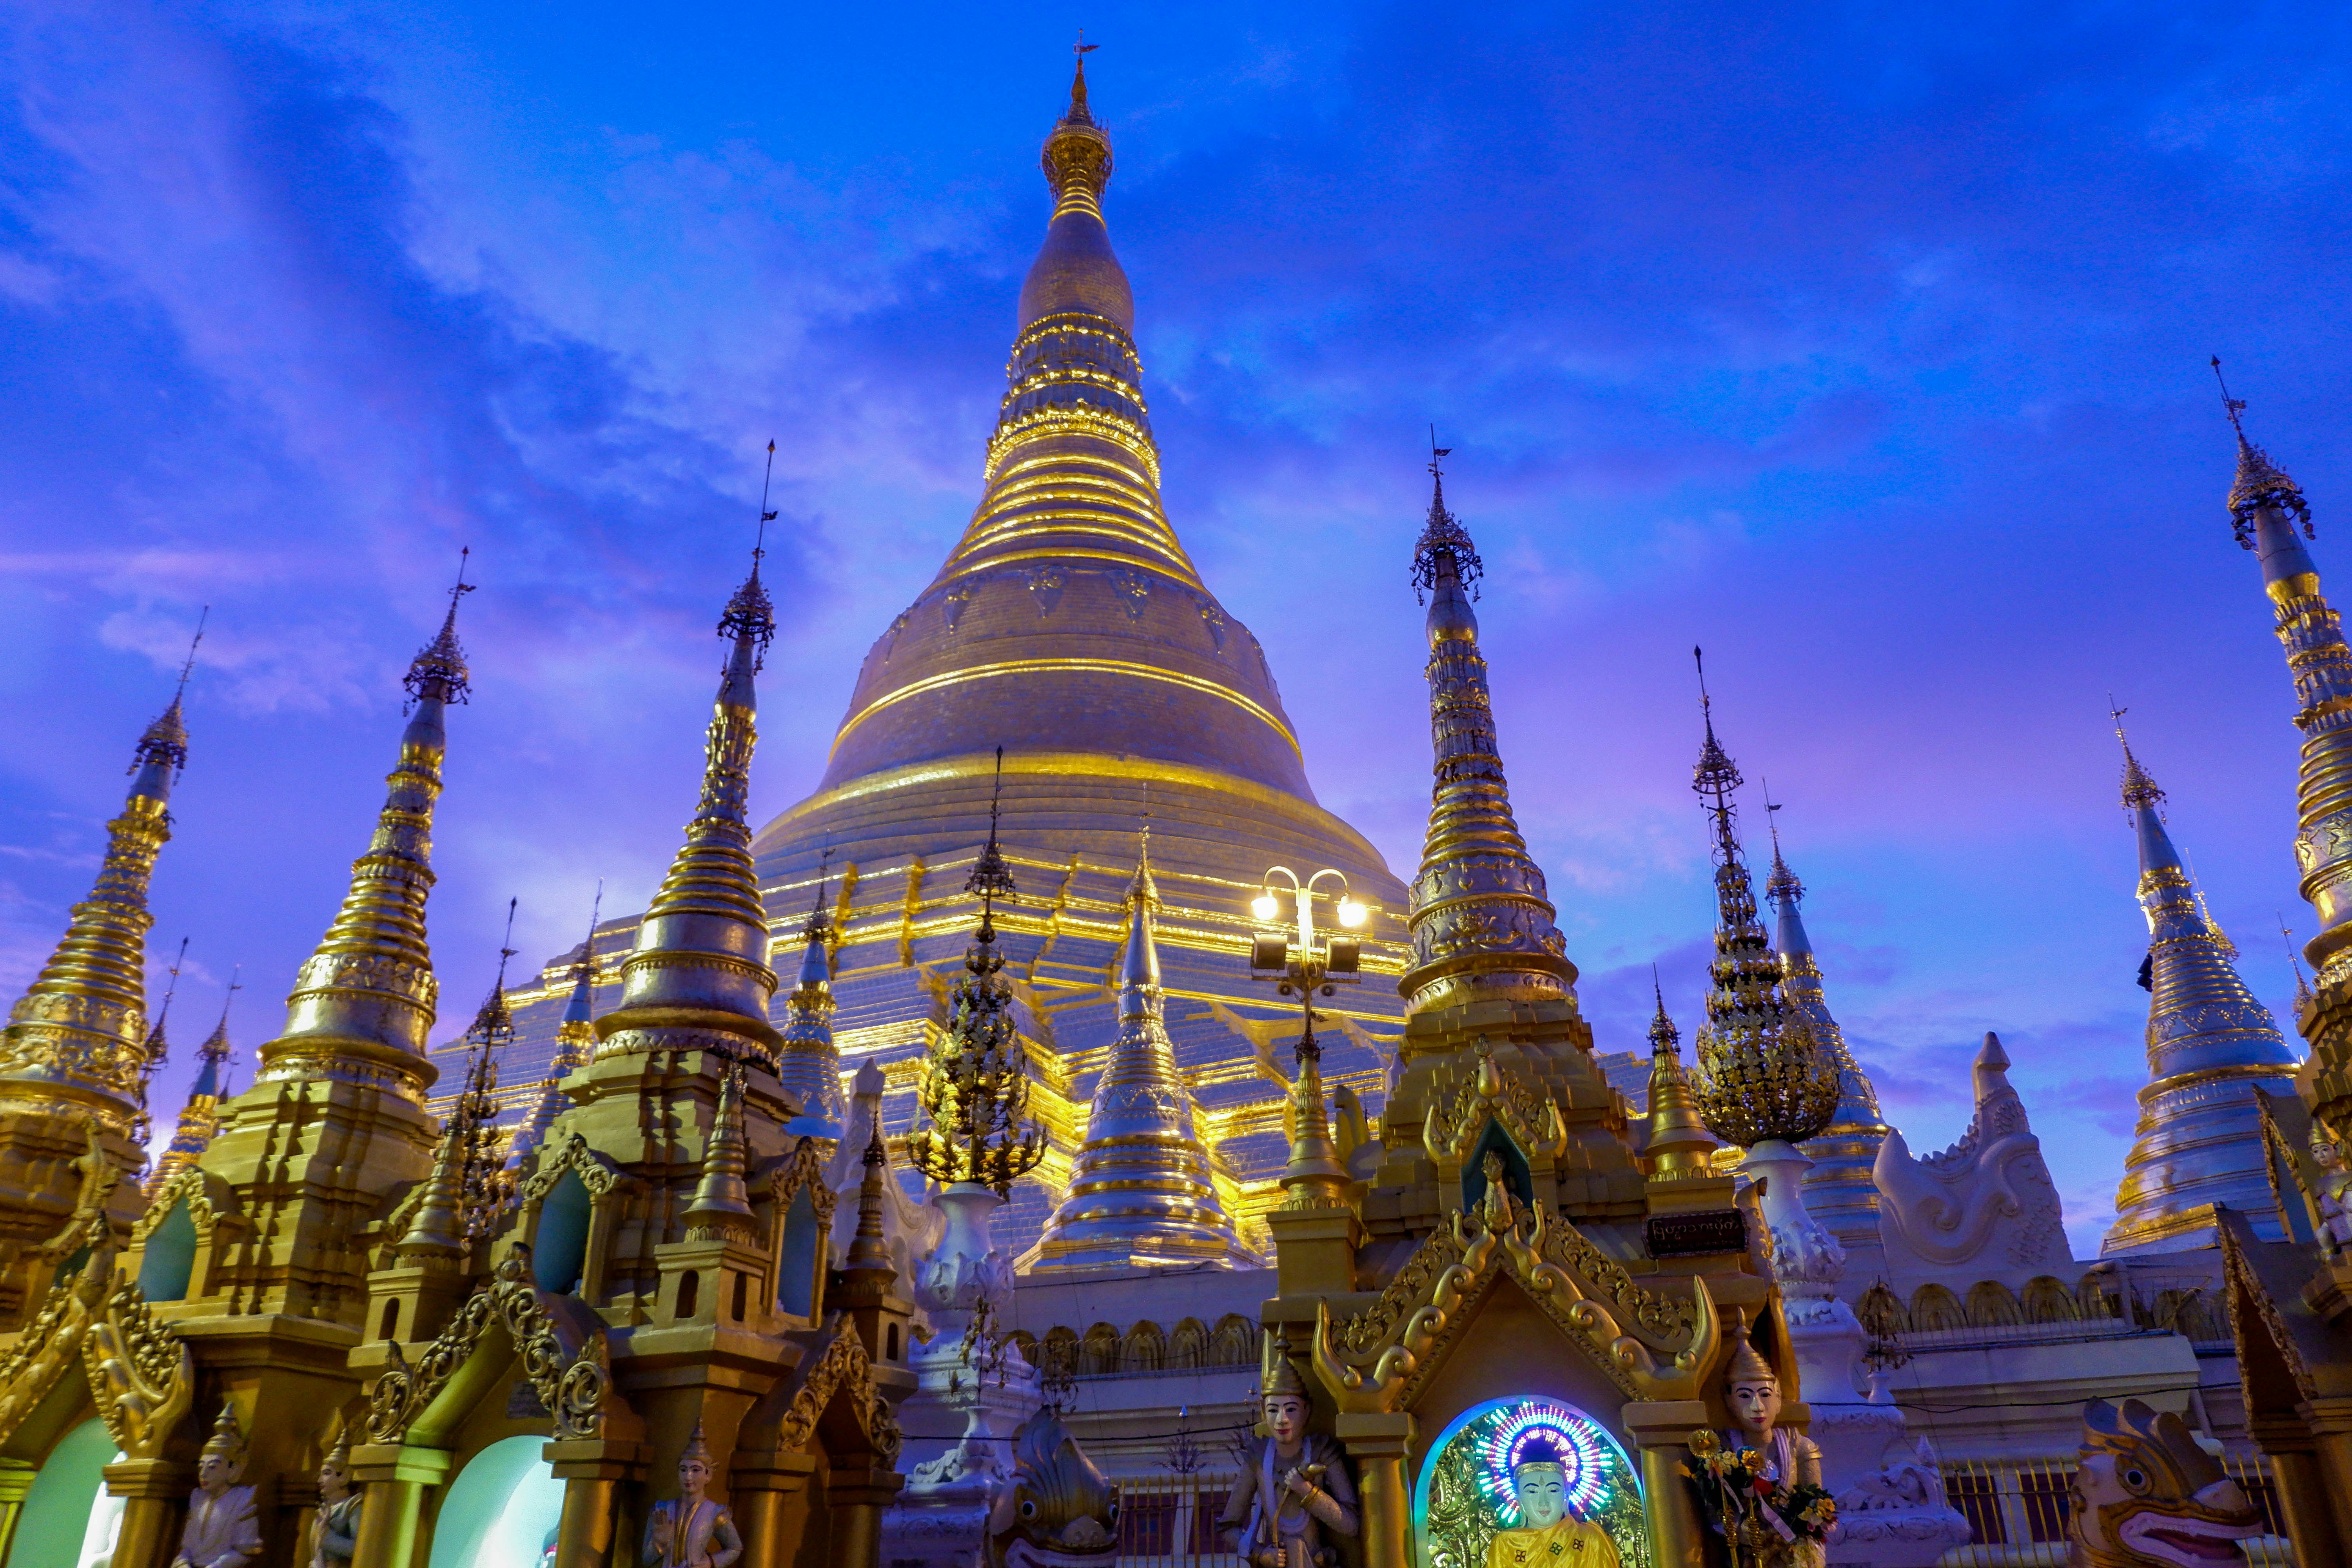 The Shwedagon Pagoda in Yangon at dusk; many small intricately carved, gold-leafed structures surround a huge dome, lit up against the night sky.